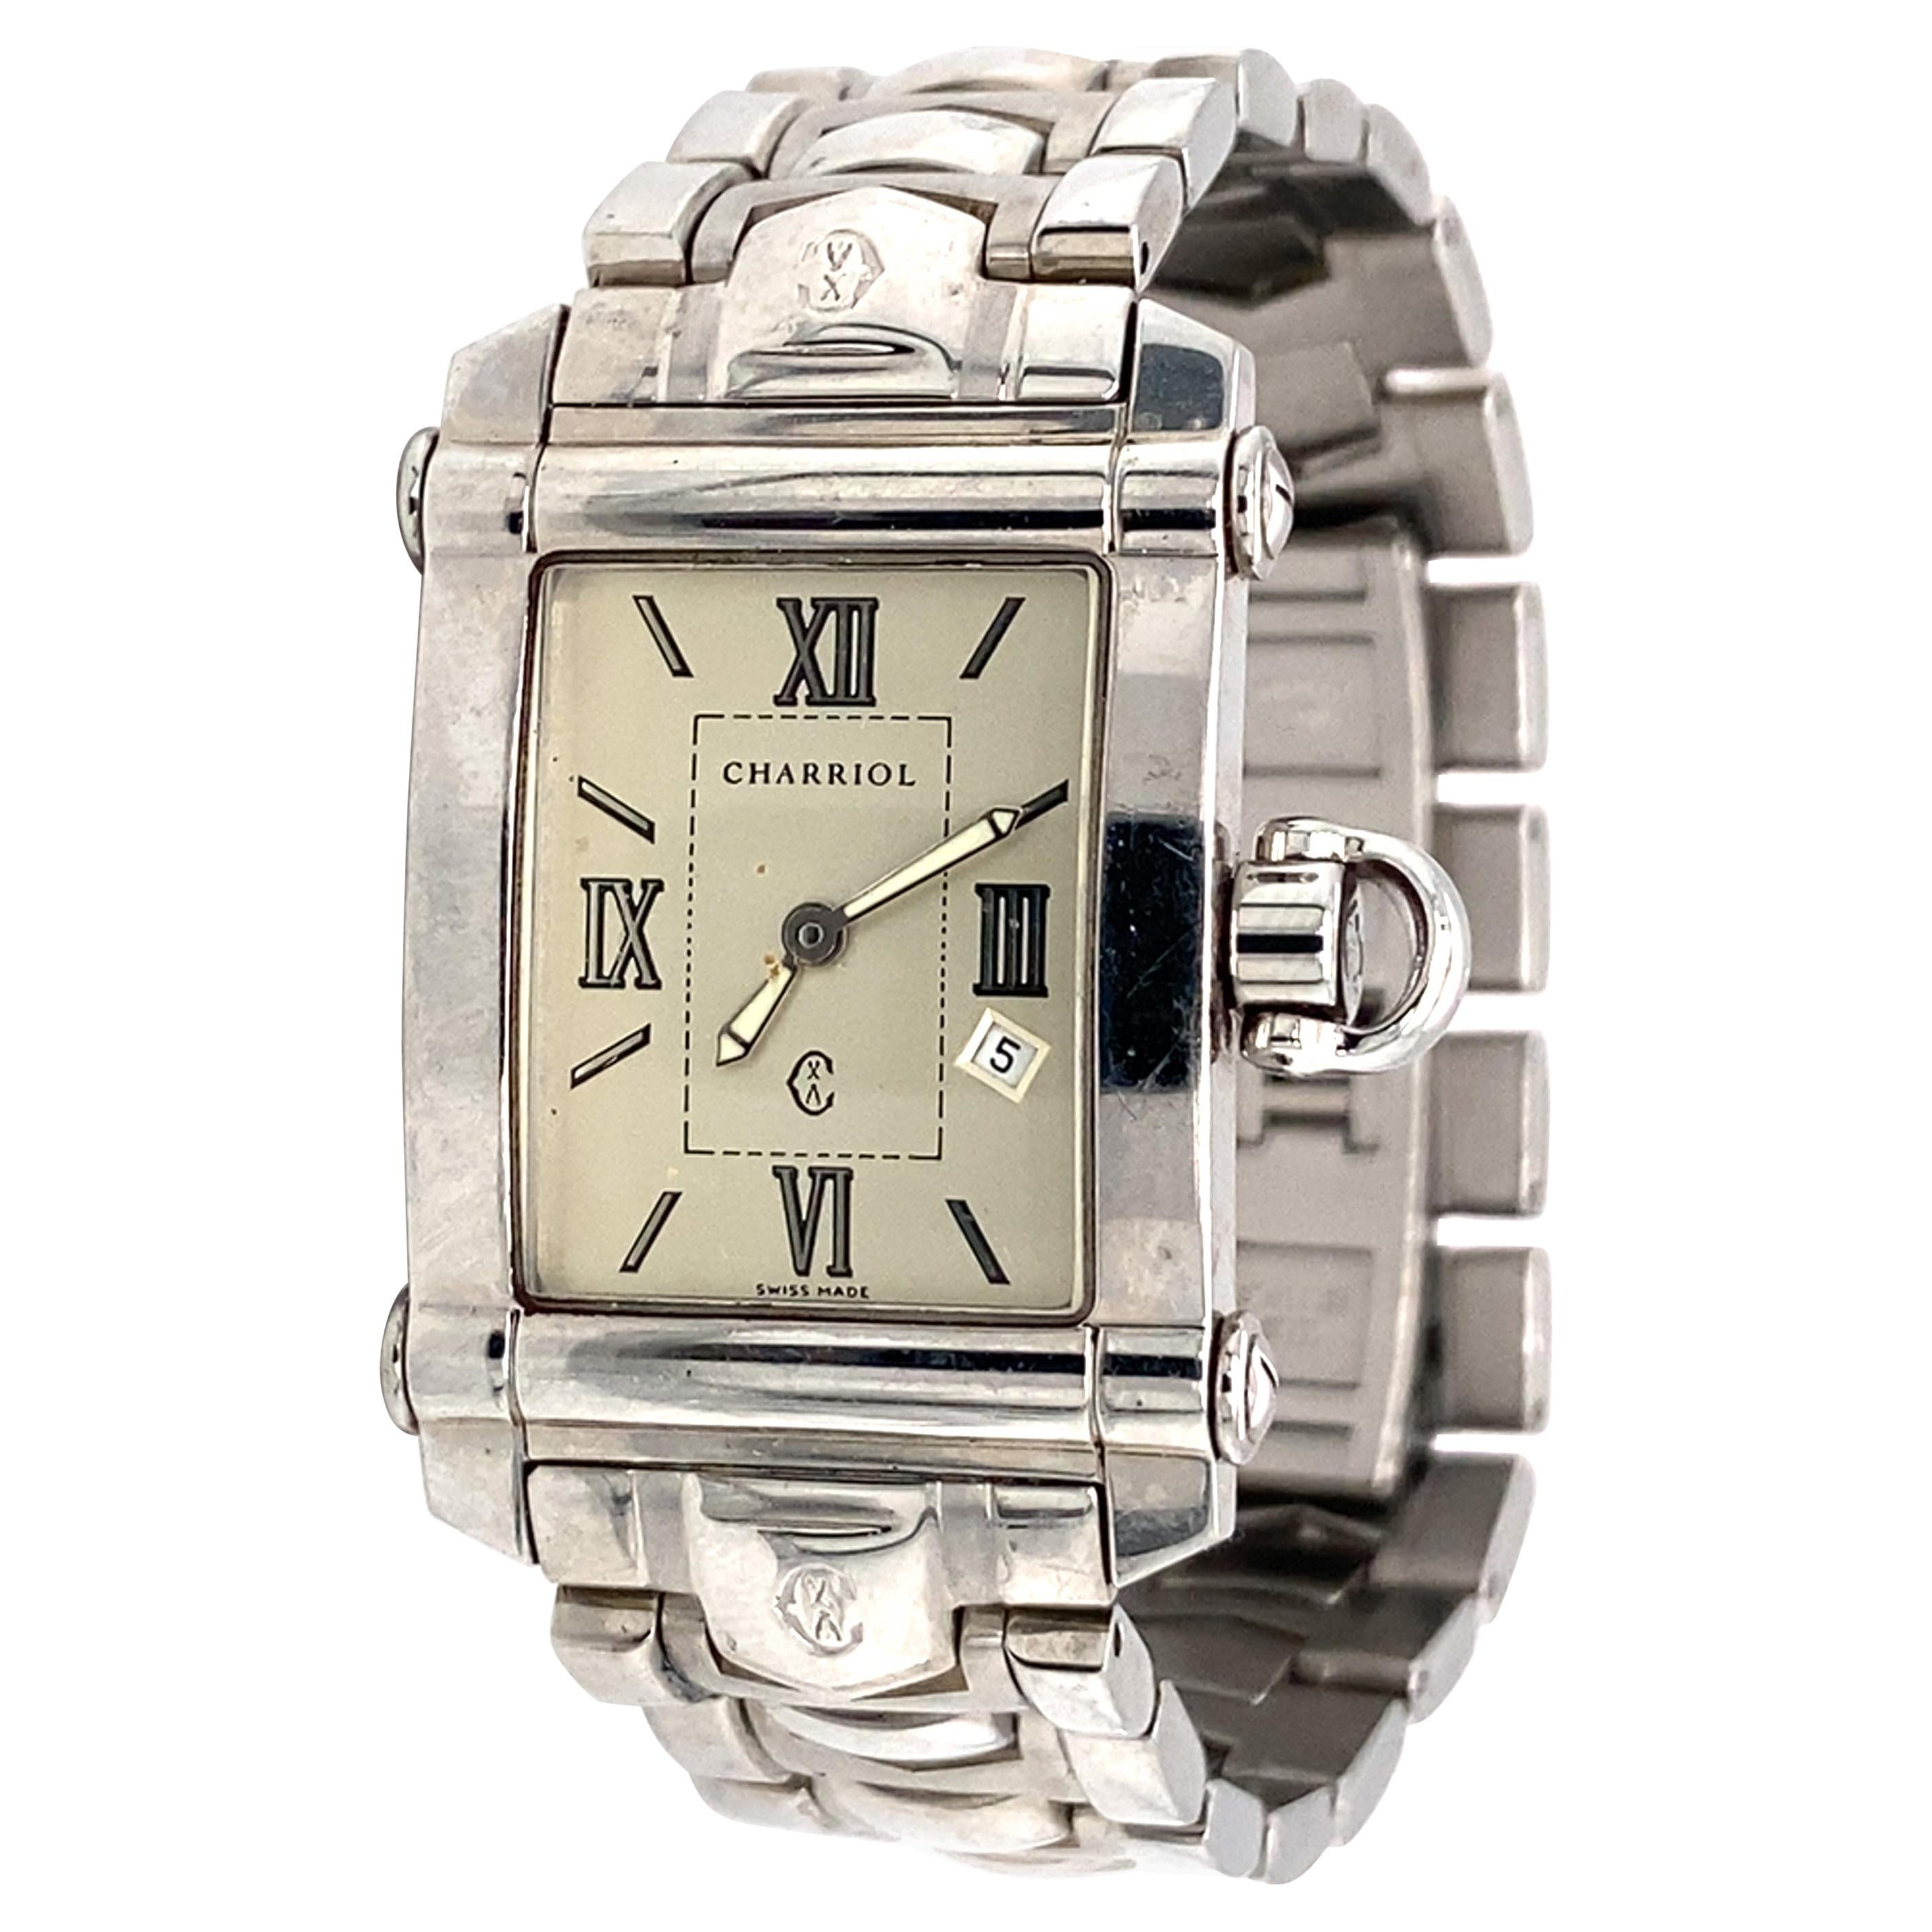 1990s Colvmbvs Charriol Stainless Steel Watch 